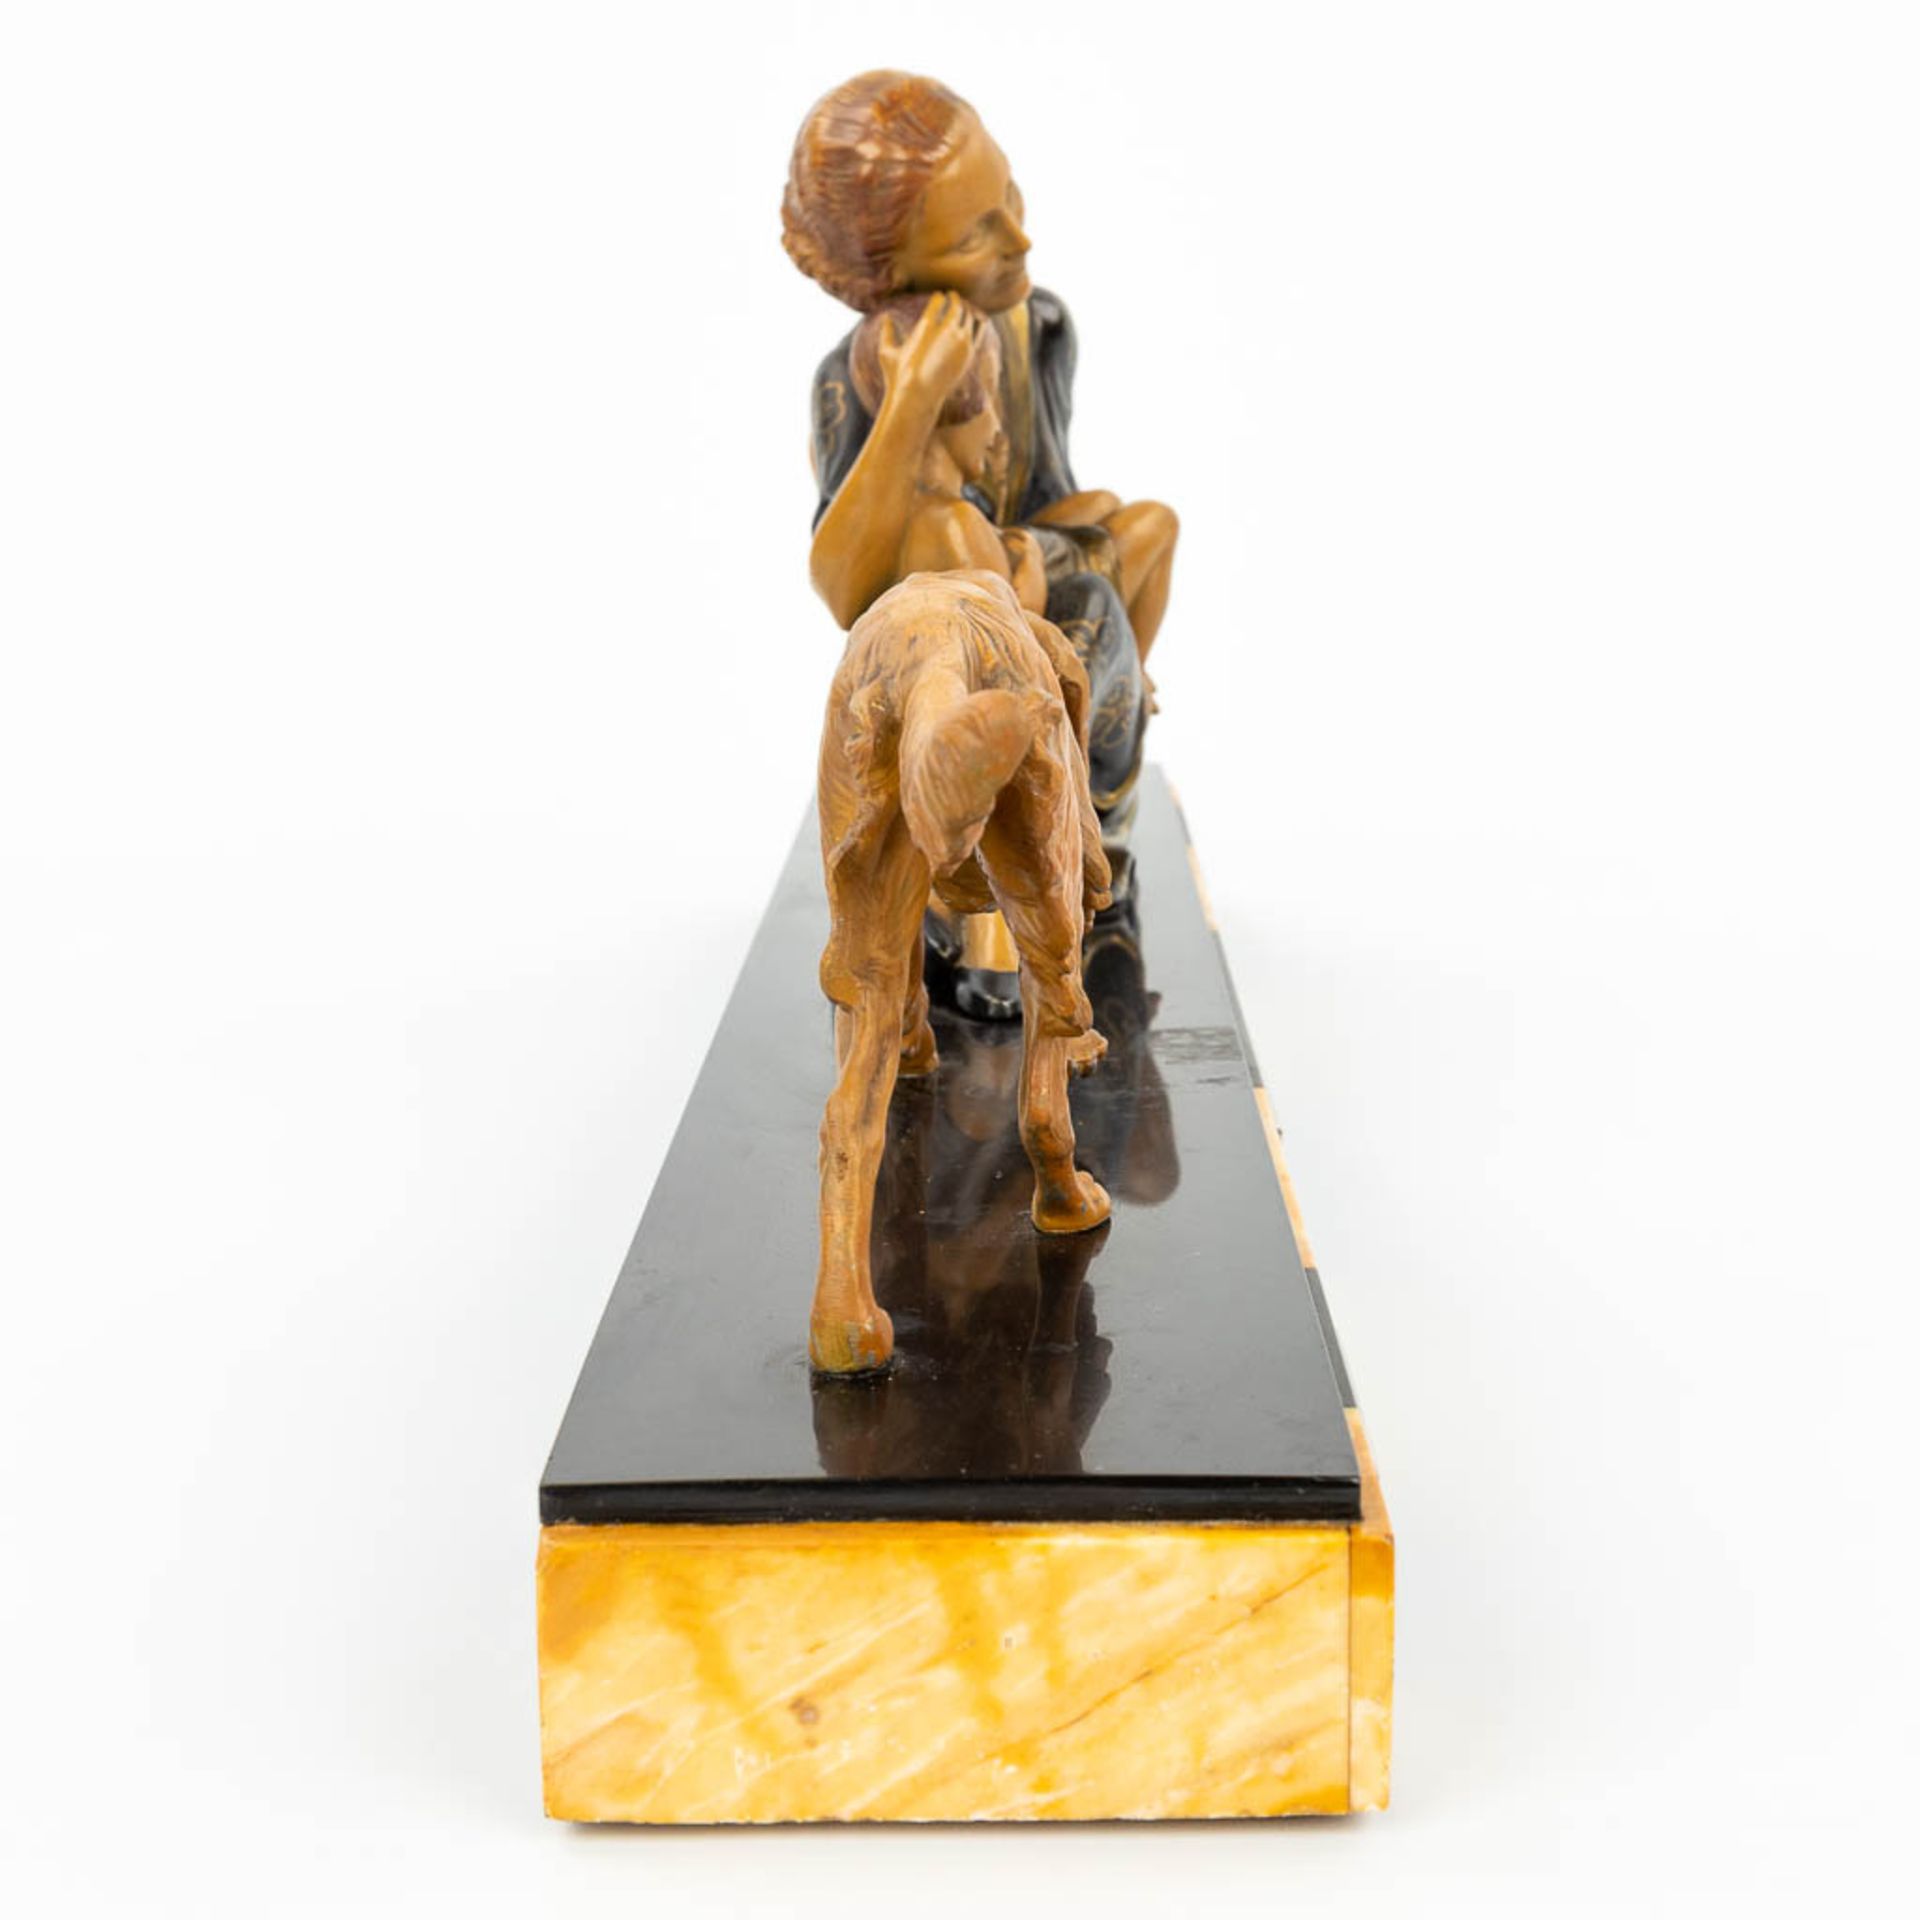 An art deco style statue of a woman with child and her dog, made of spelter and mounted on a marble - Image 2 of 12